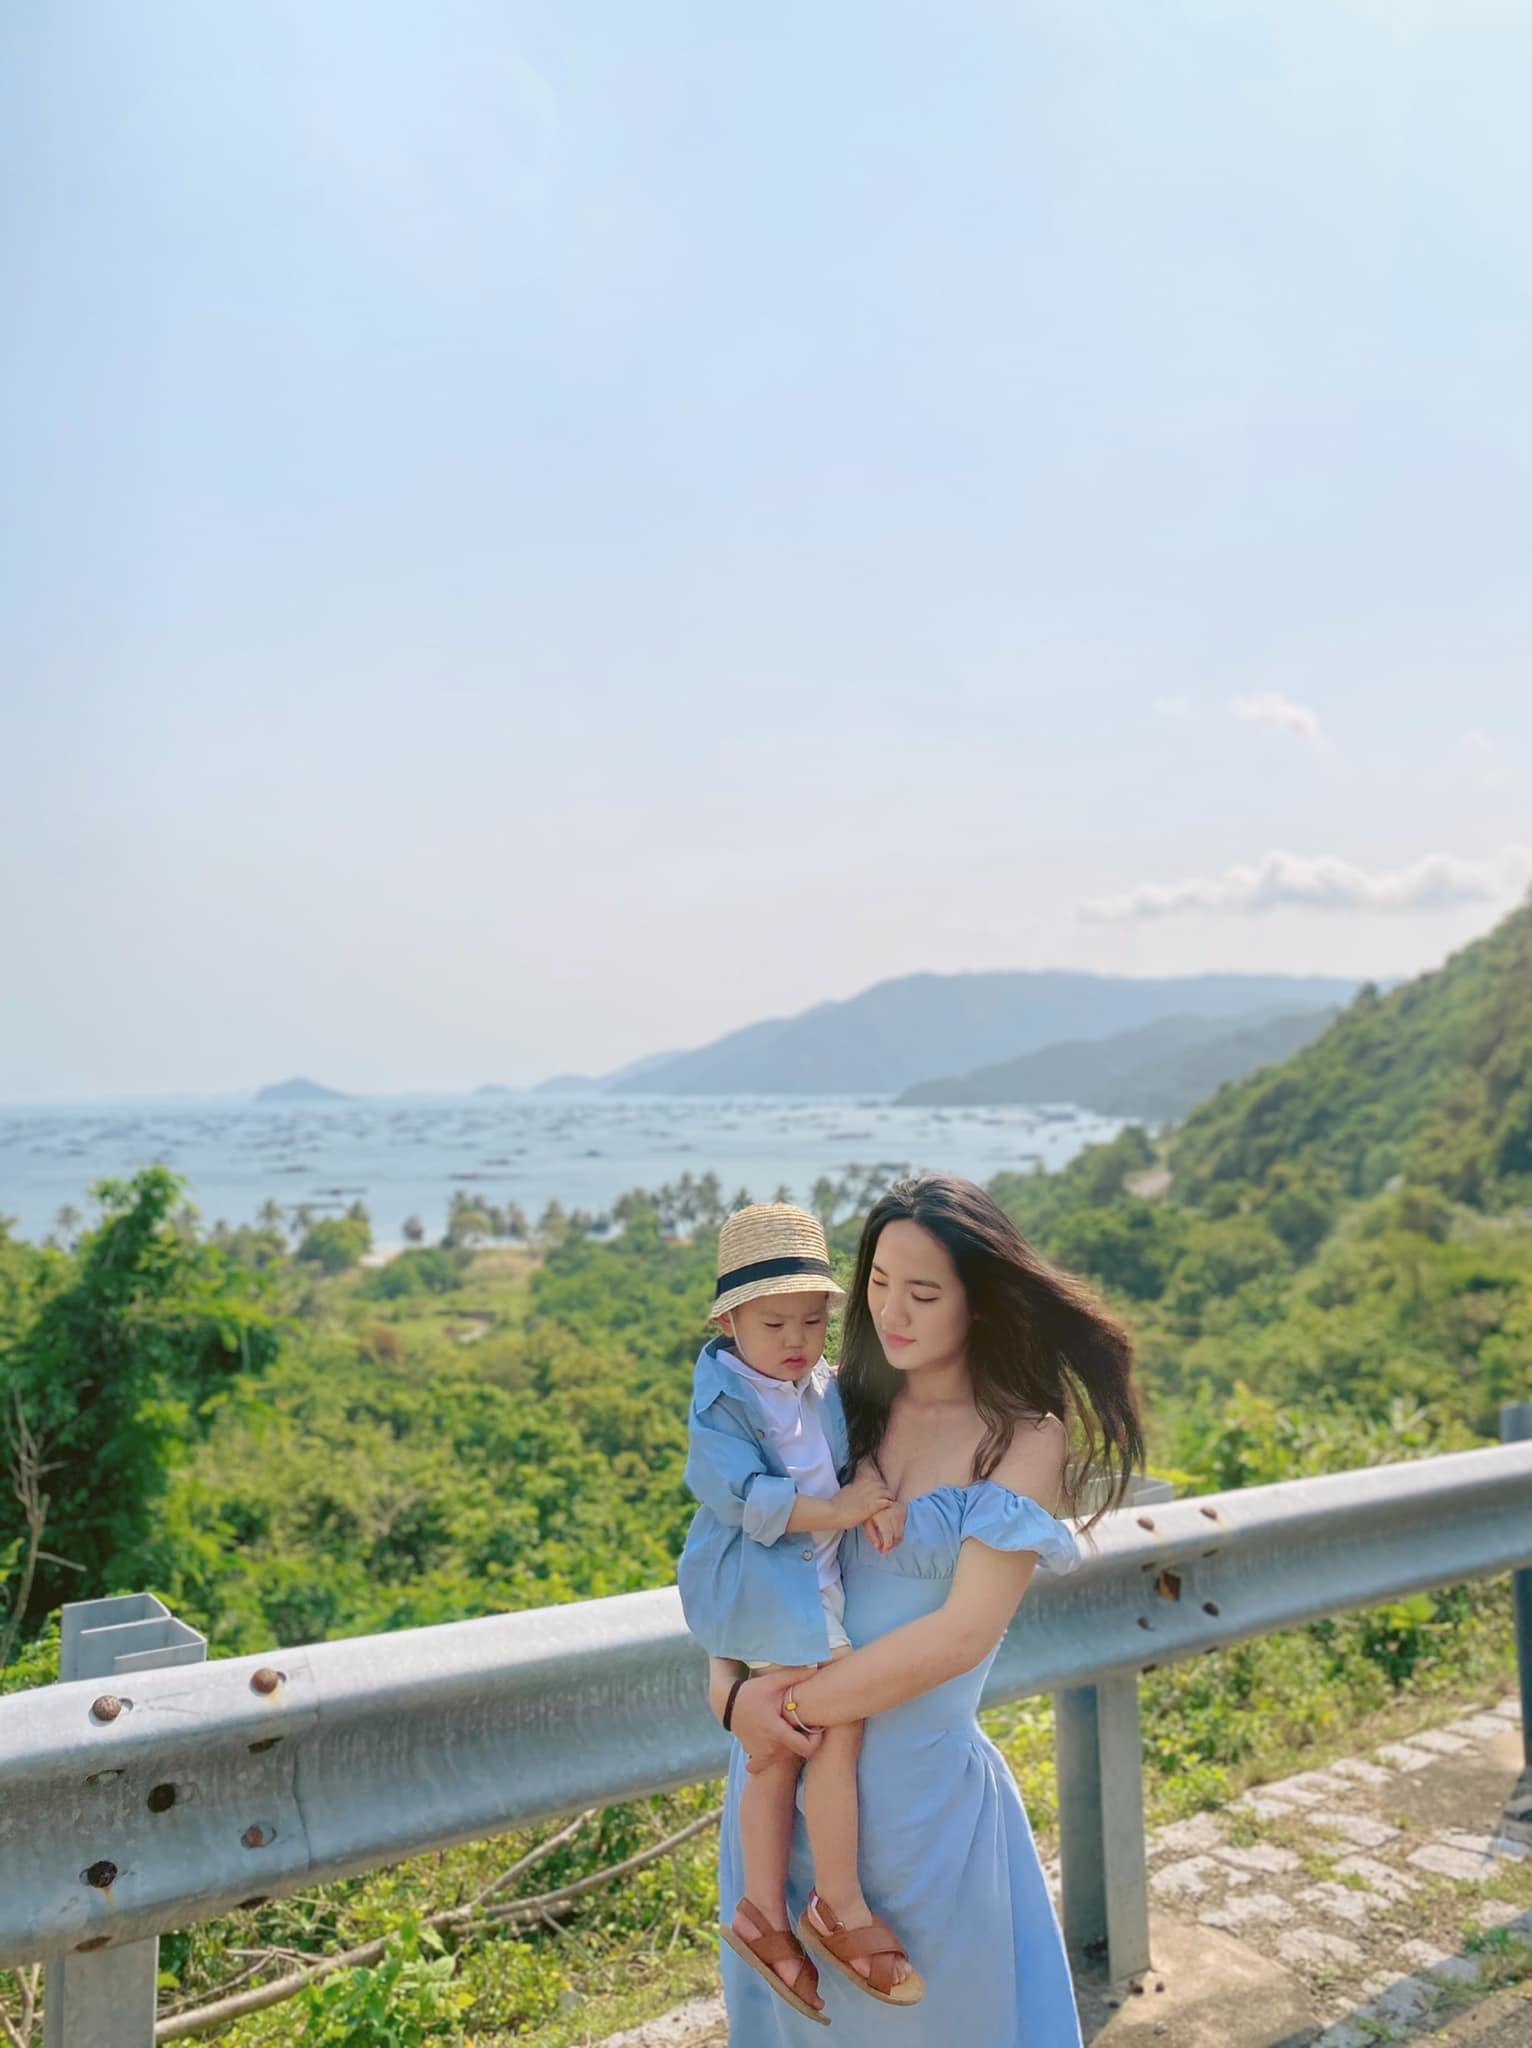 Sharing a travel guide for young children, young mothers receive 